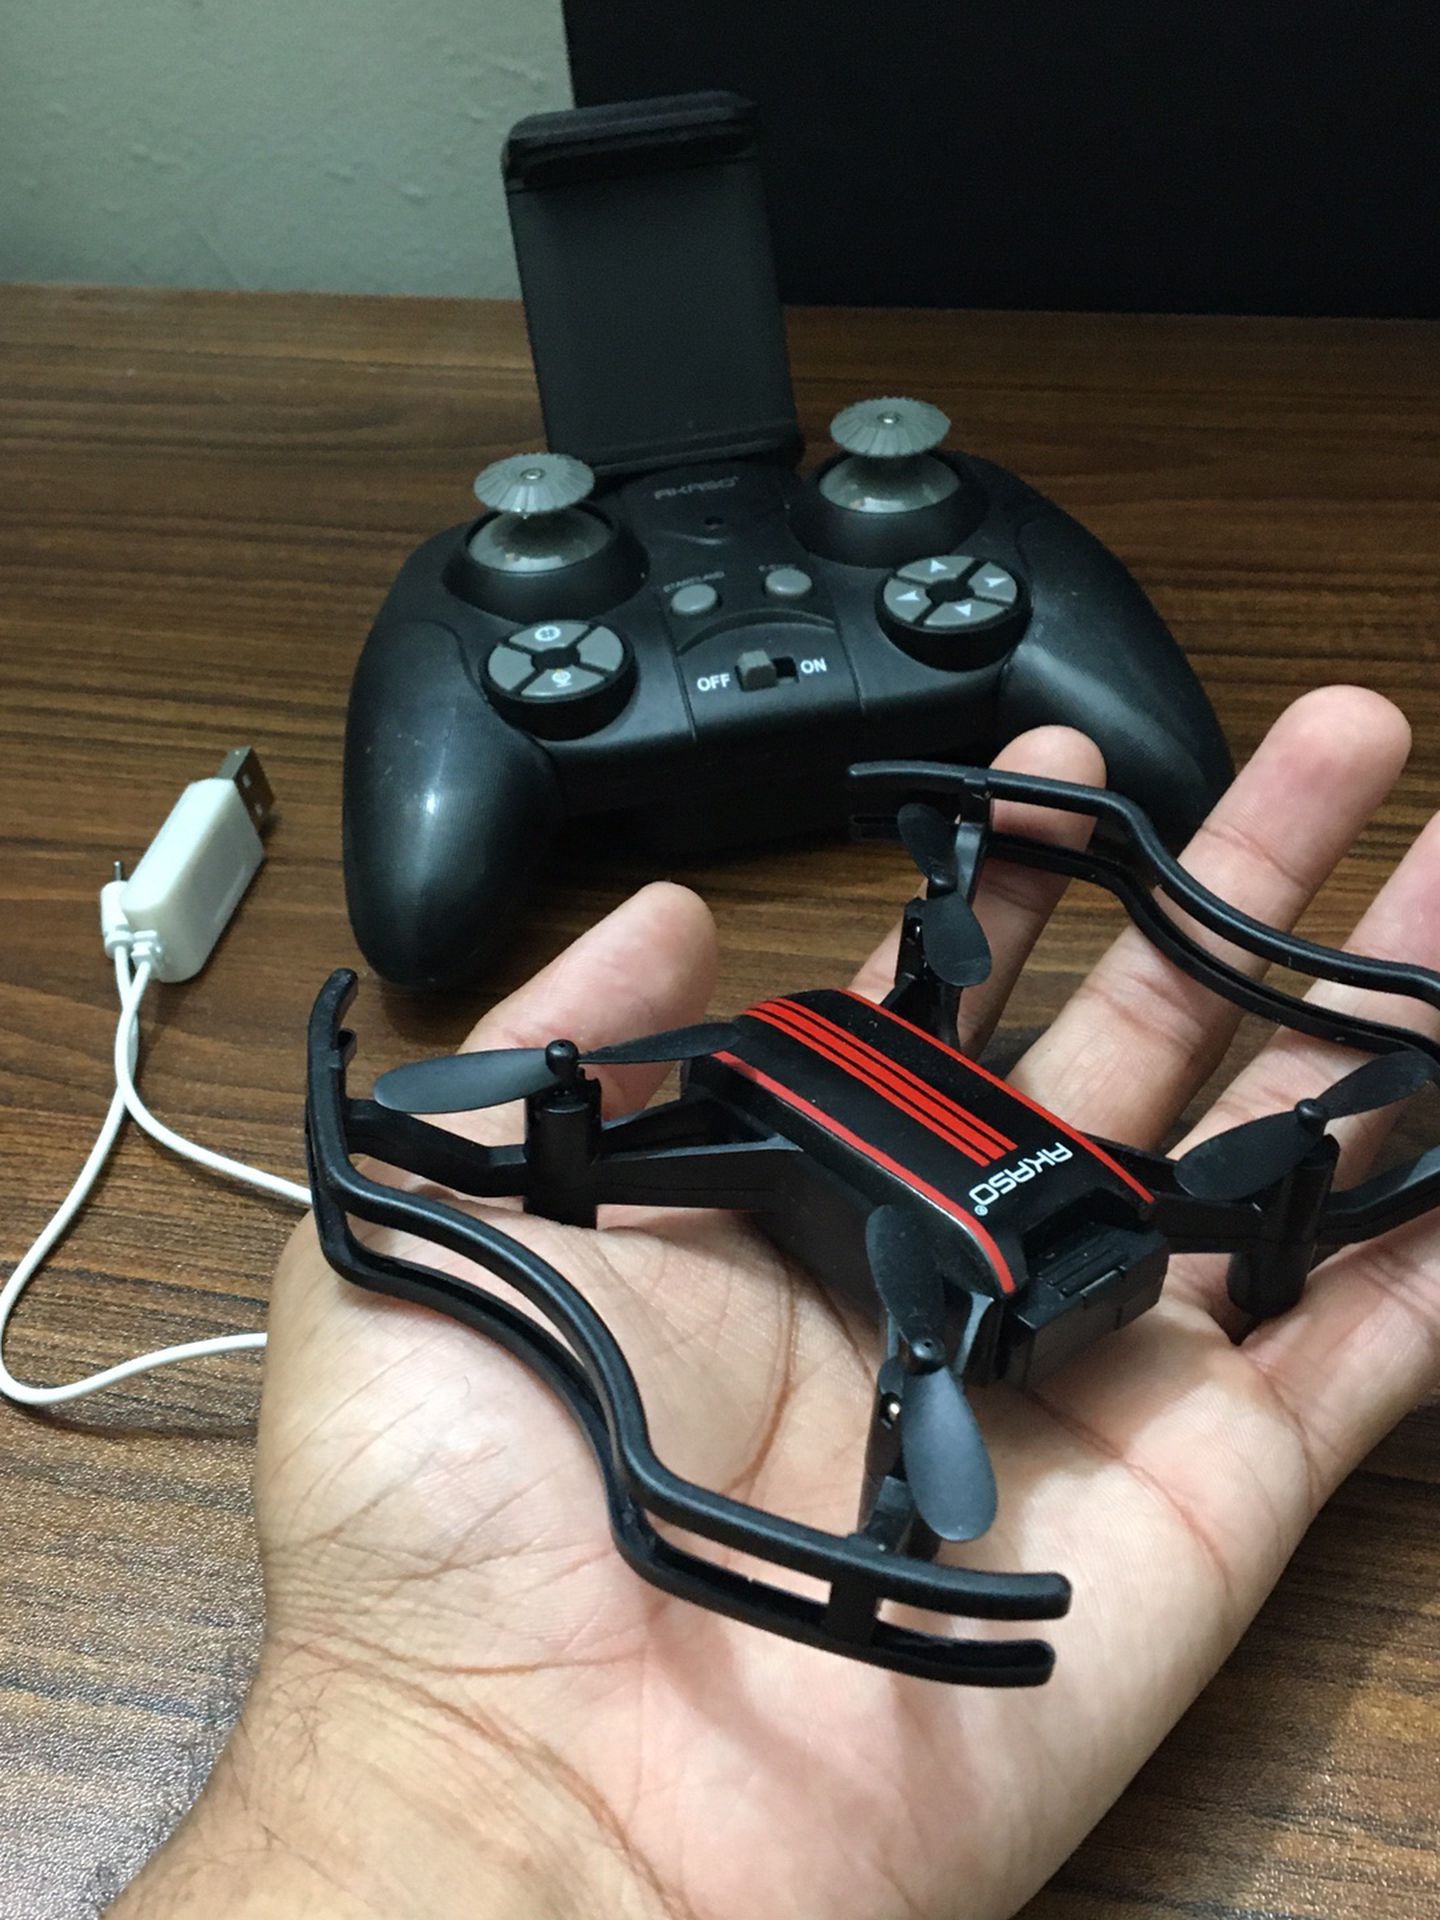 Mini Drone With Charger And Remote Control